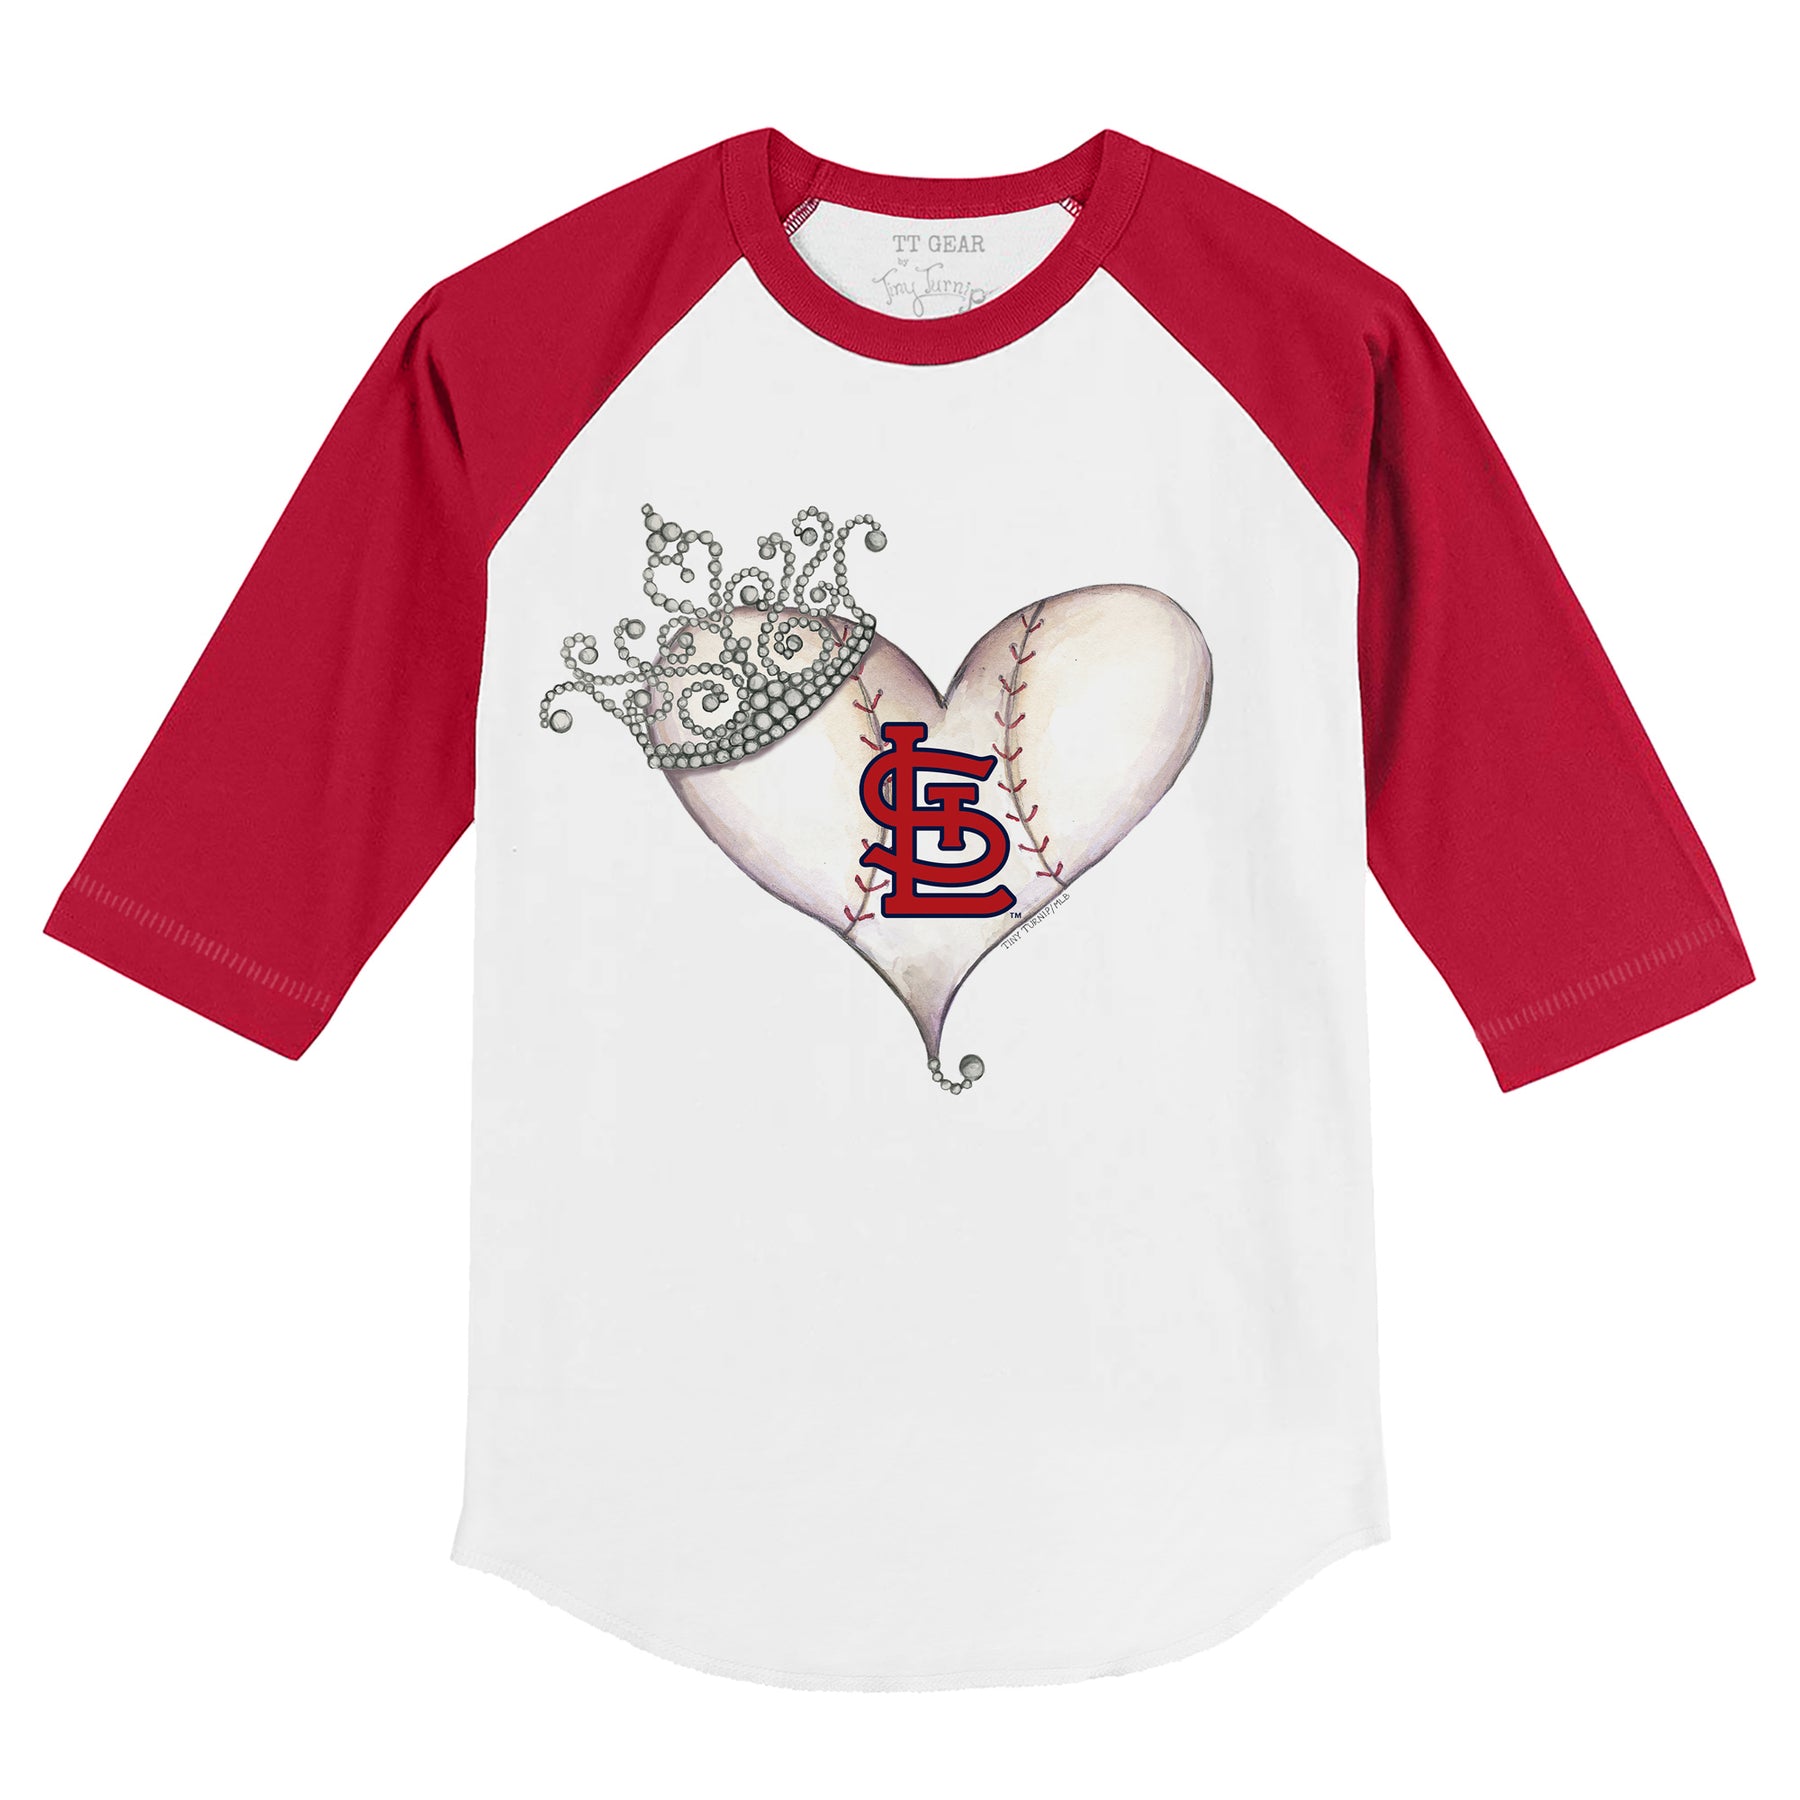 Youth Tiny Turnip Red St. Louis Cardinals Baseball Love T-Shirt Size: Small